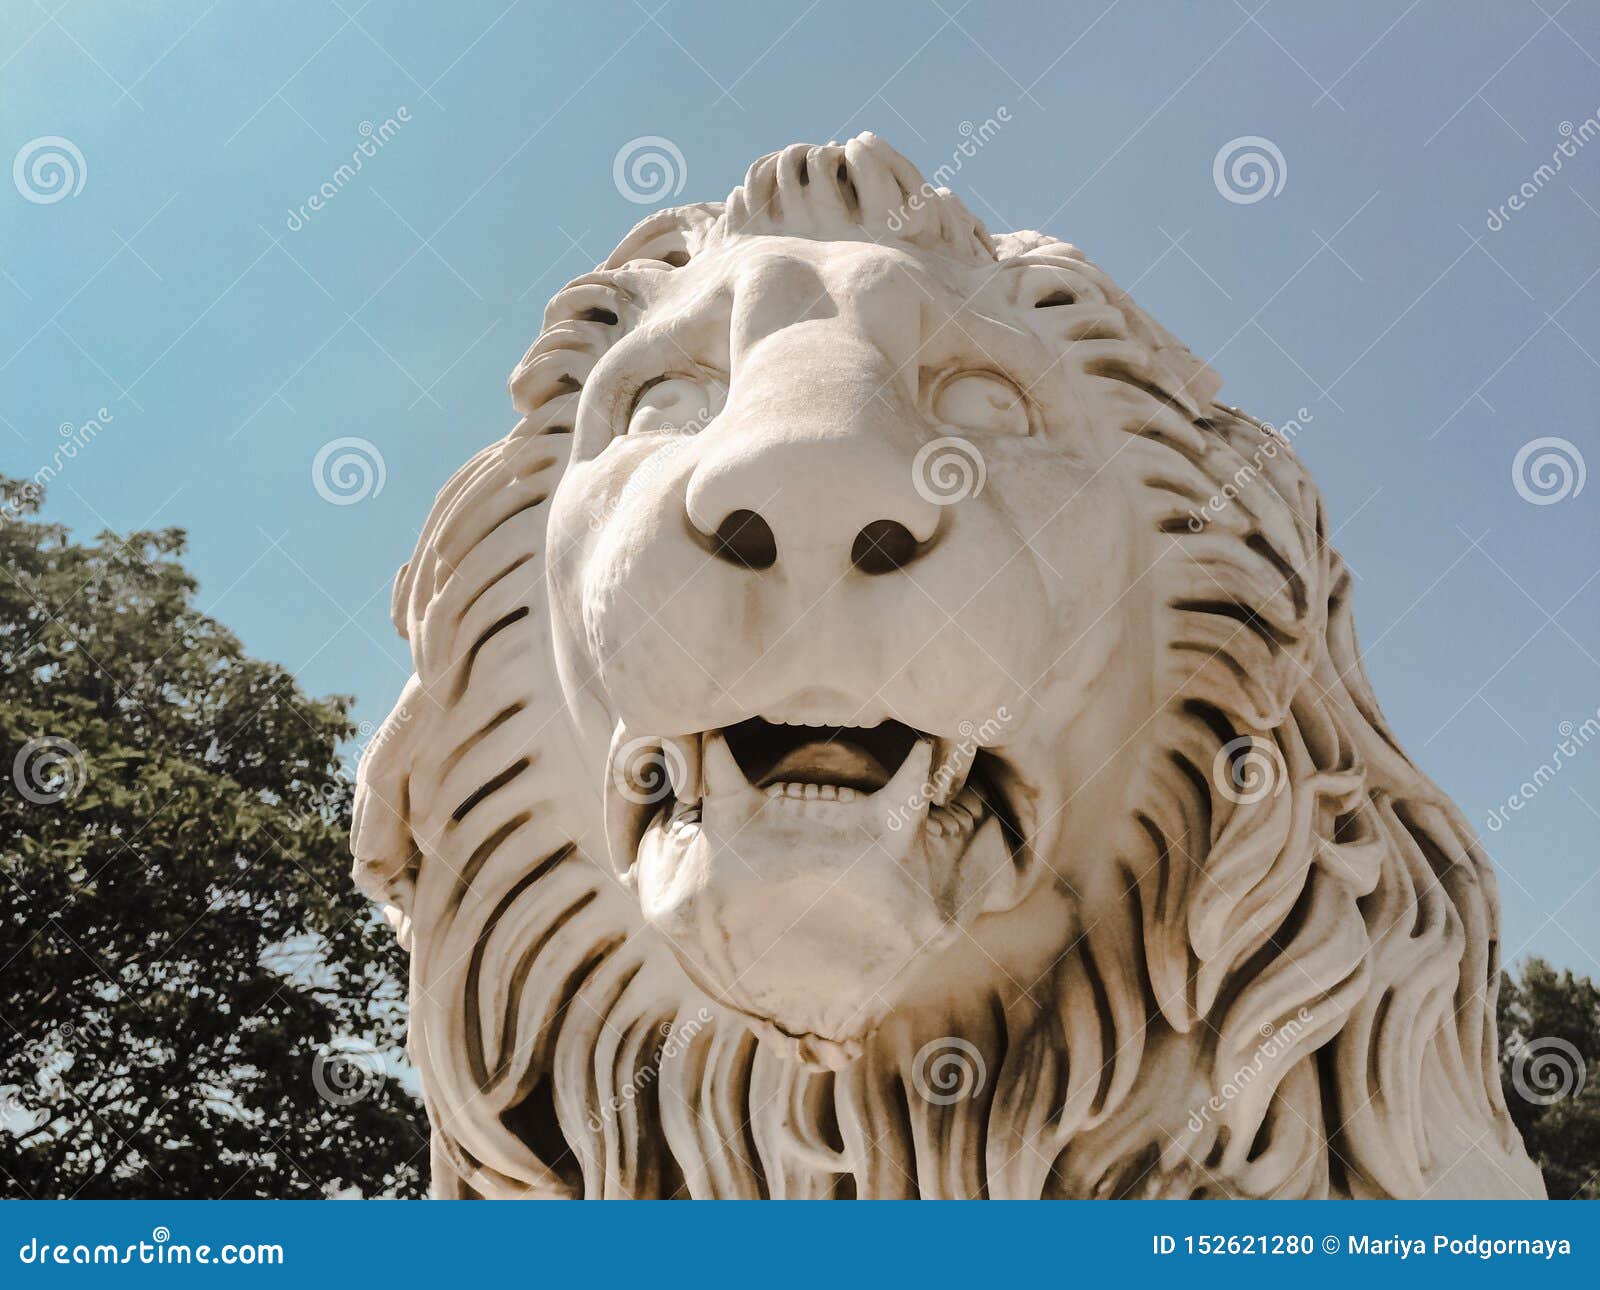 White Sculpture Close Up Of A Lion`s Head With Open Maw With Fangs And Mane In The Sunlight